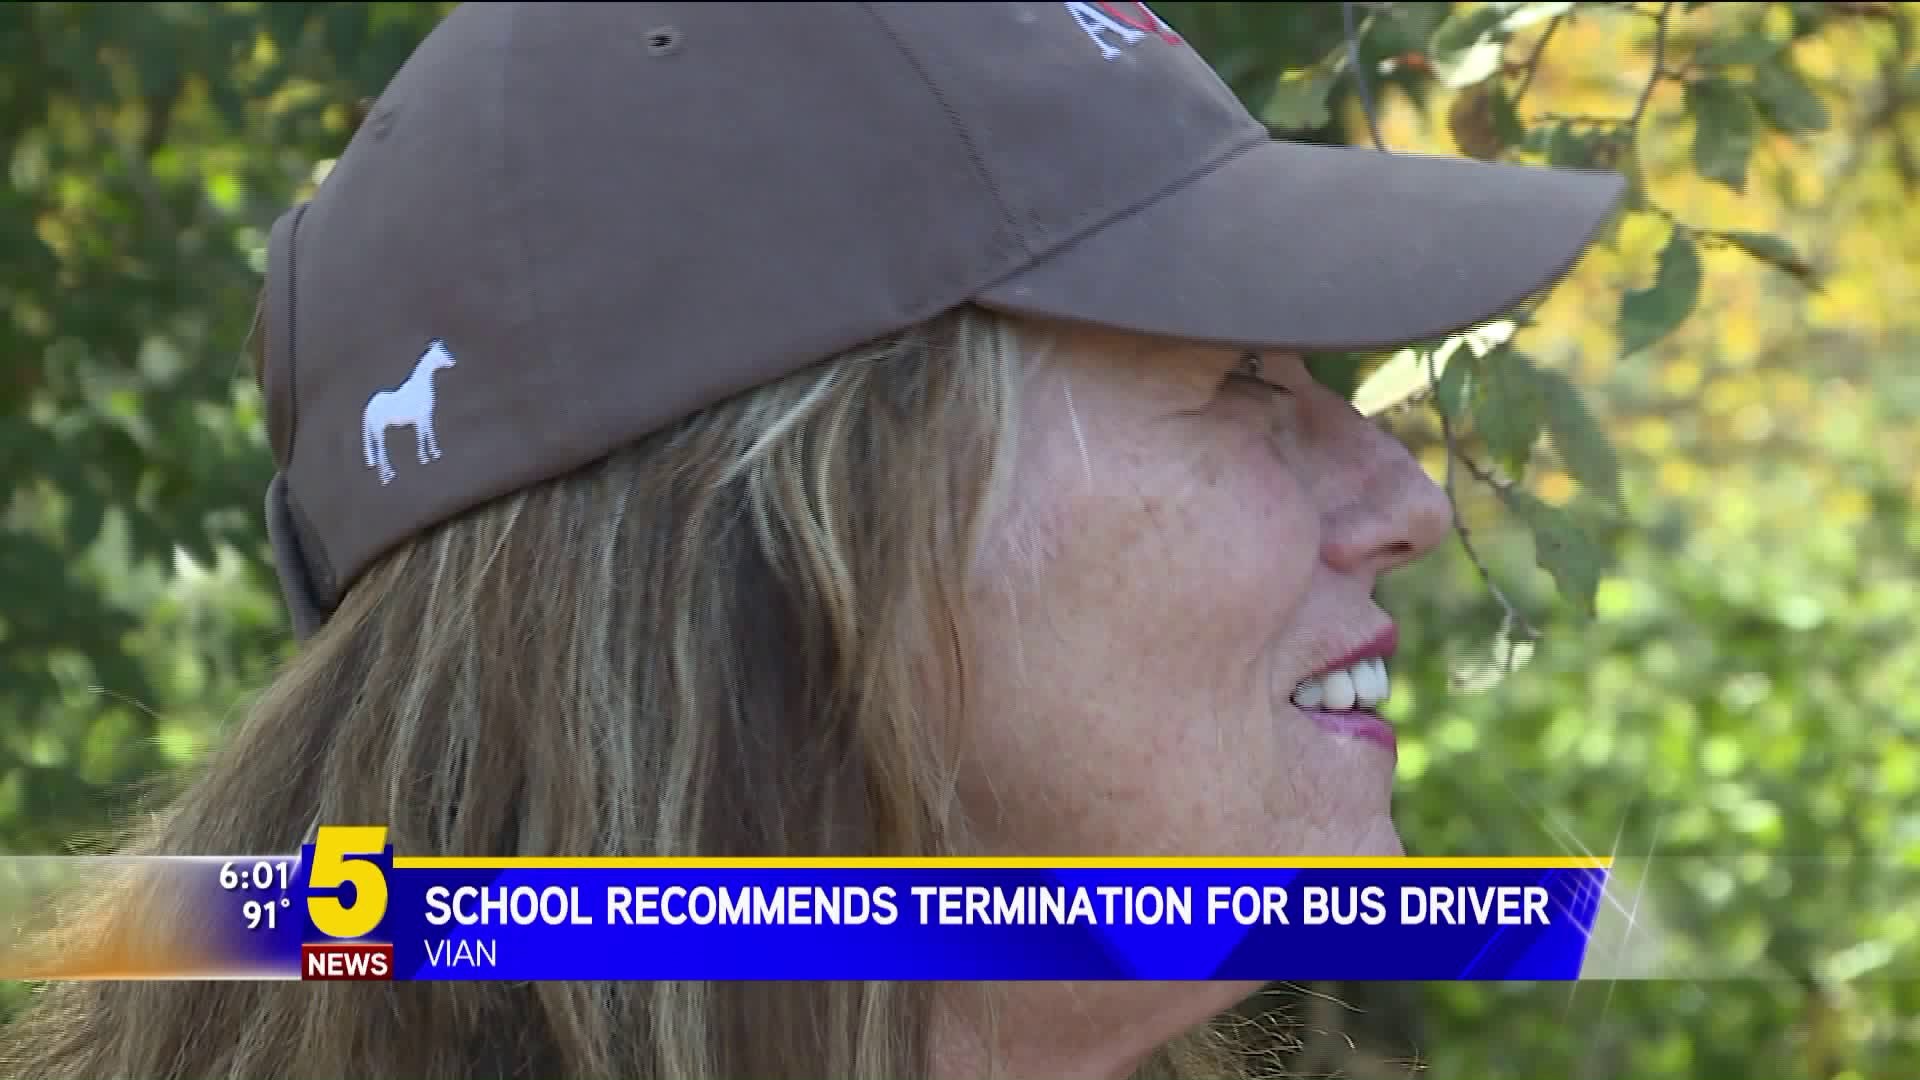 School Recommends Termination For Bus Driver